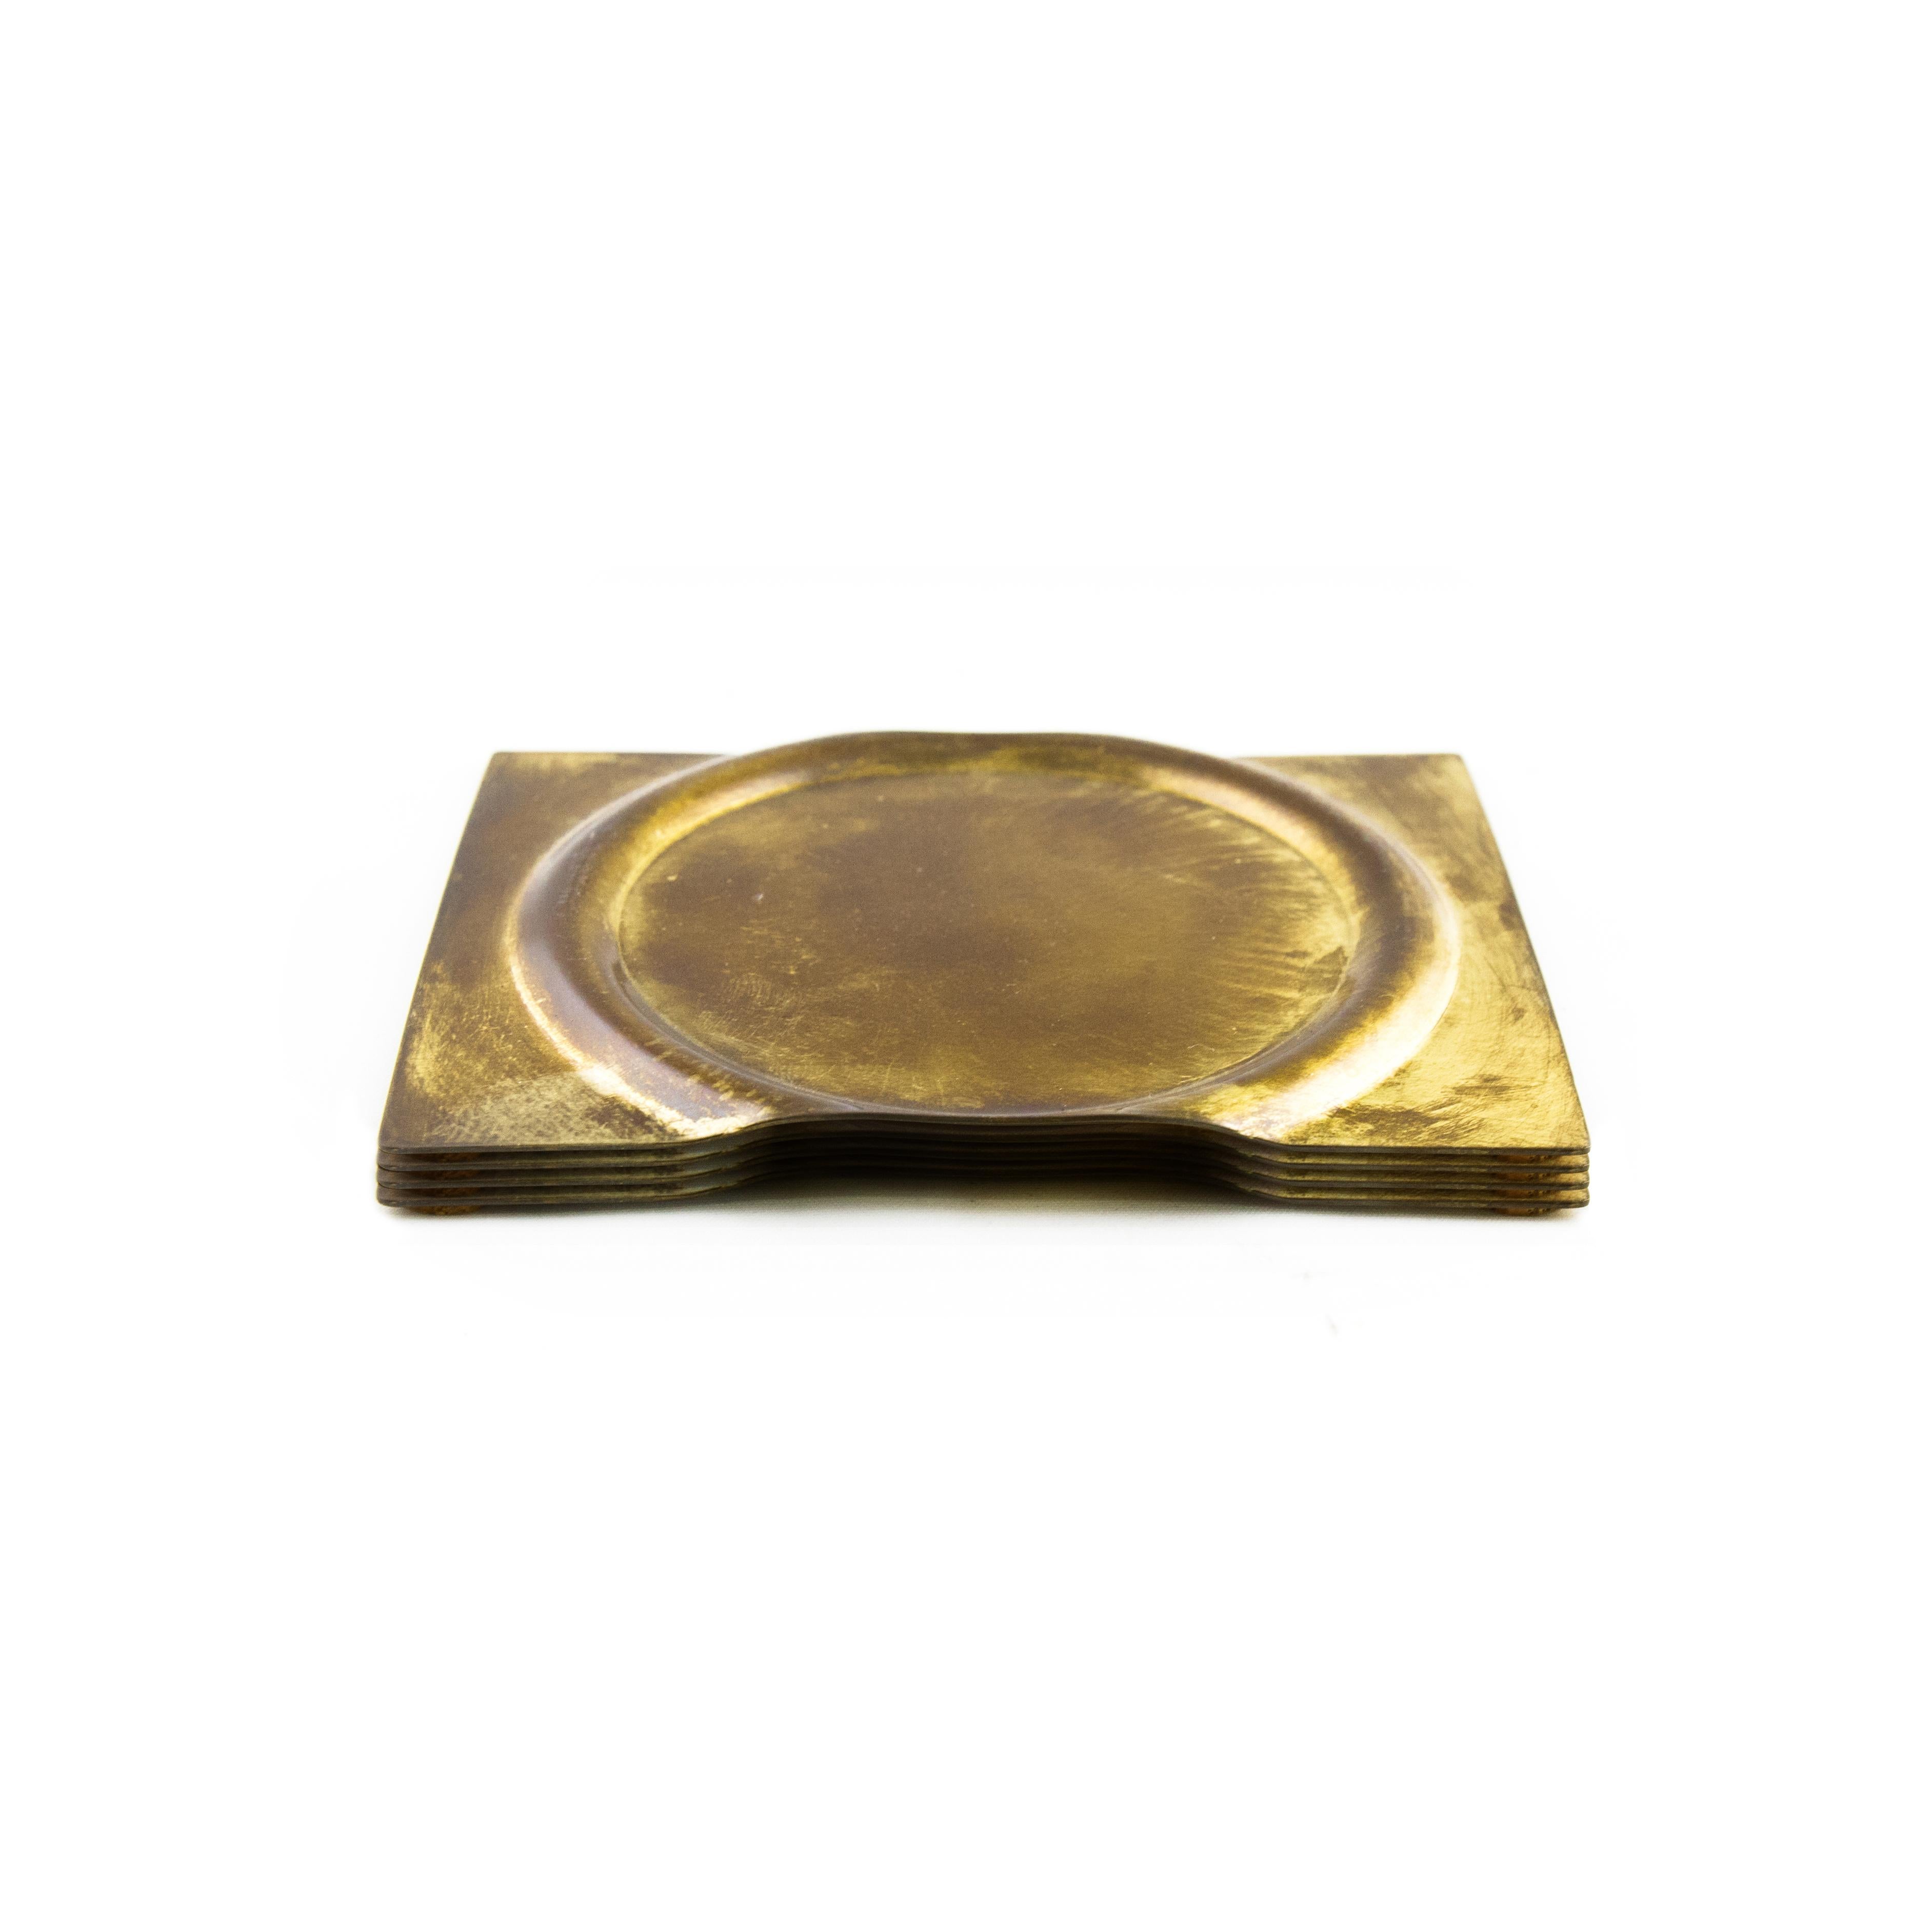 Set of 4 brass coasters by Gentner Design
Dimensions: D 12 x W 9.5 cm
Materials: dull tarnished brass

Hand-formed from a sheet of brass, emphasizing the material’s pliable characteristics expressed through the process of production, each piece